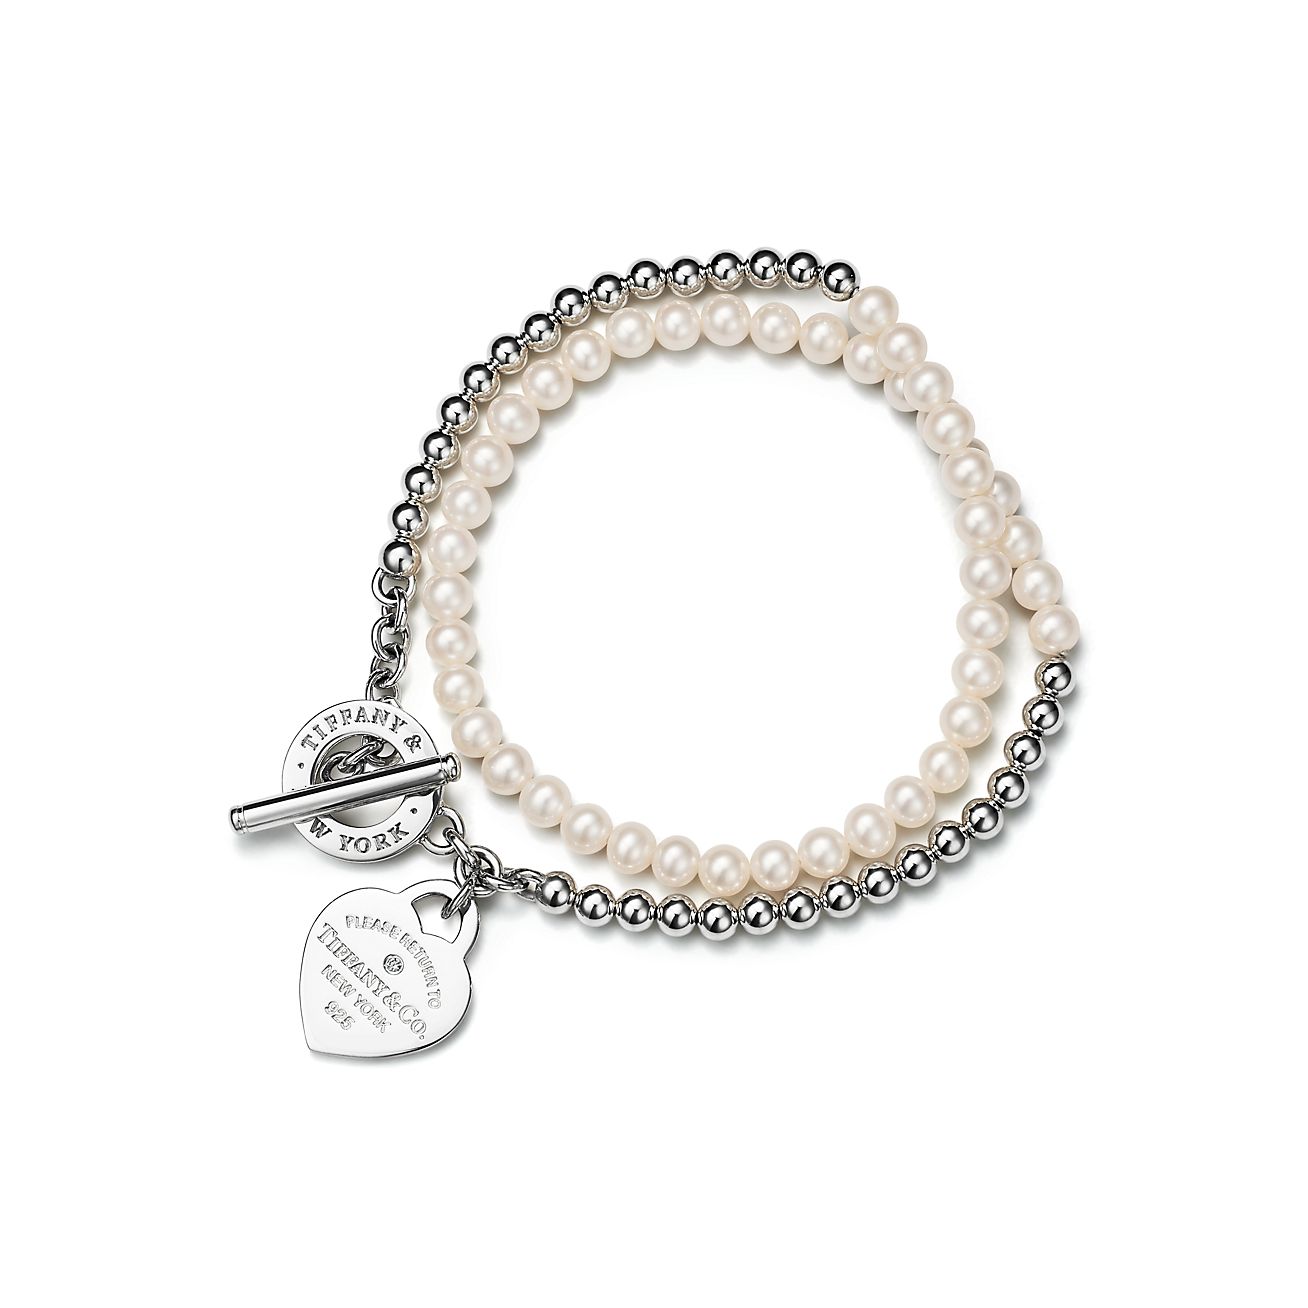 Return to Tiffany™ Wrap Bead Bracelet in Silver with Pearls and a Diamond, Small | Tiffany & Co.